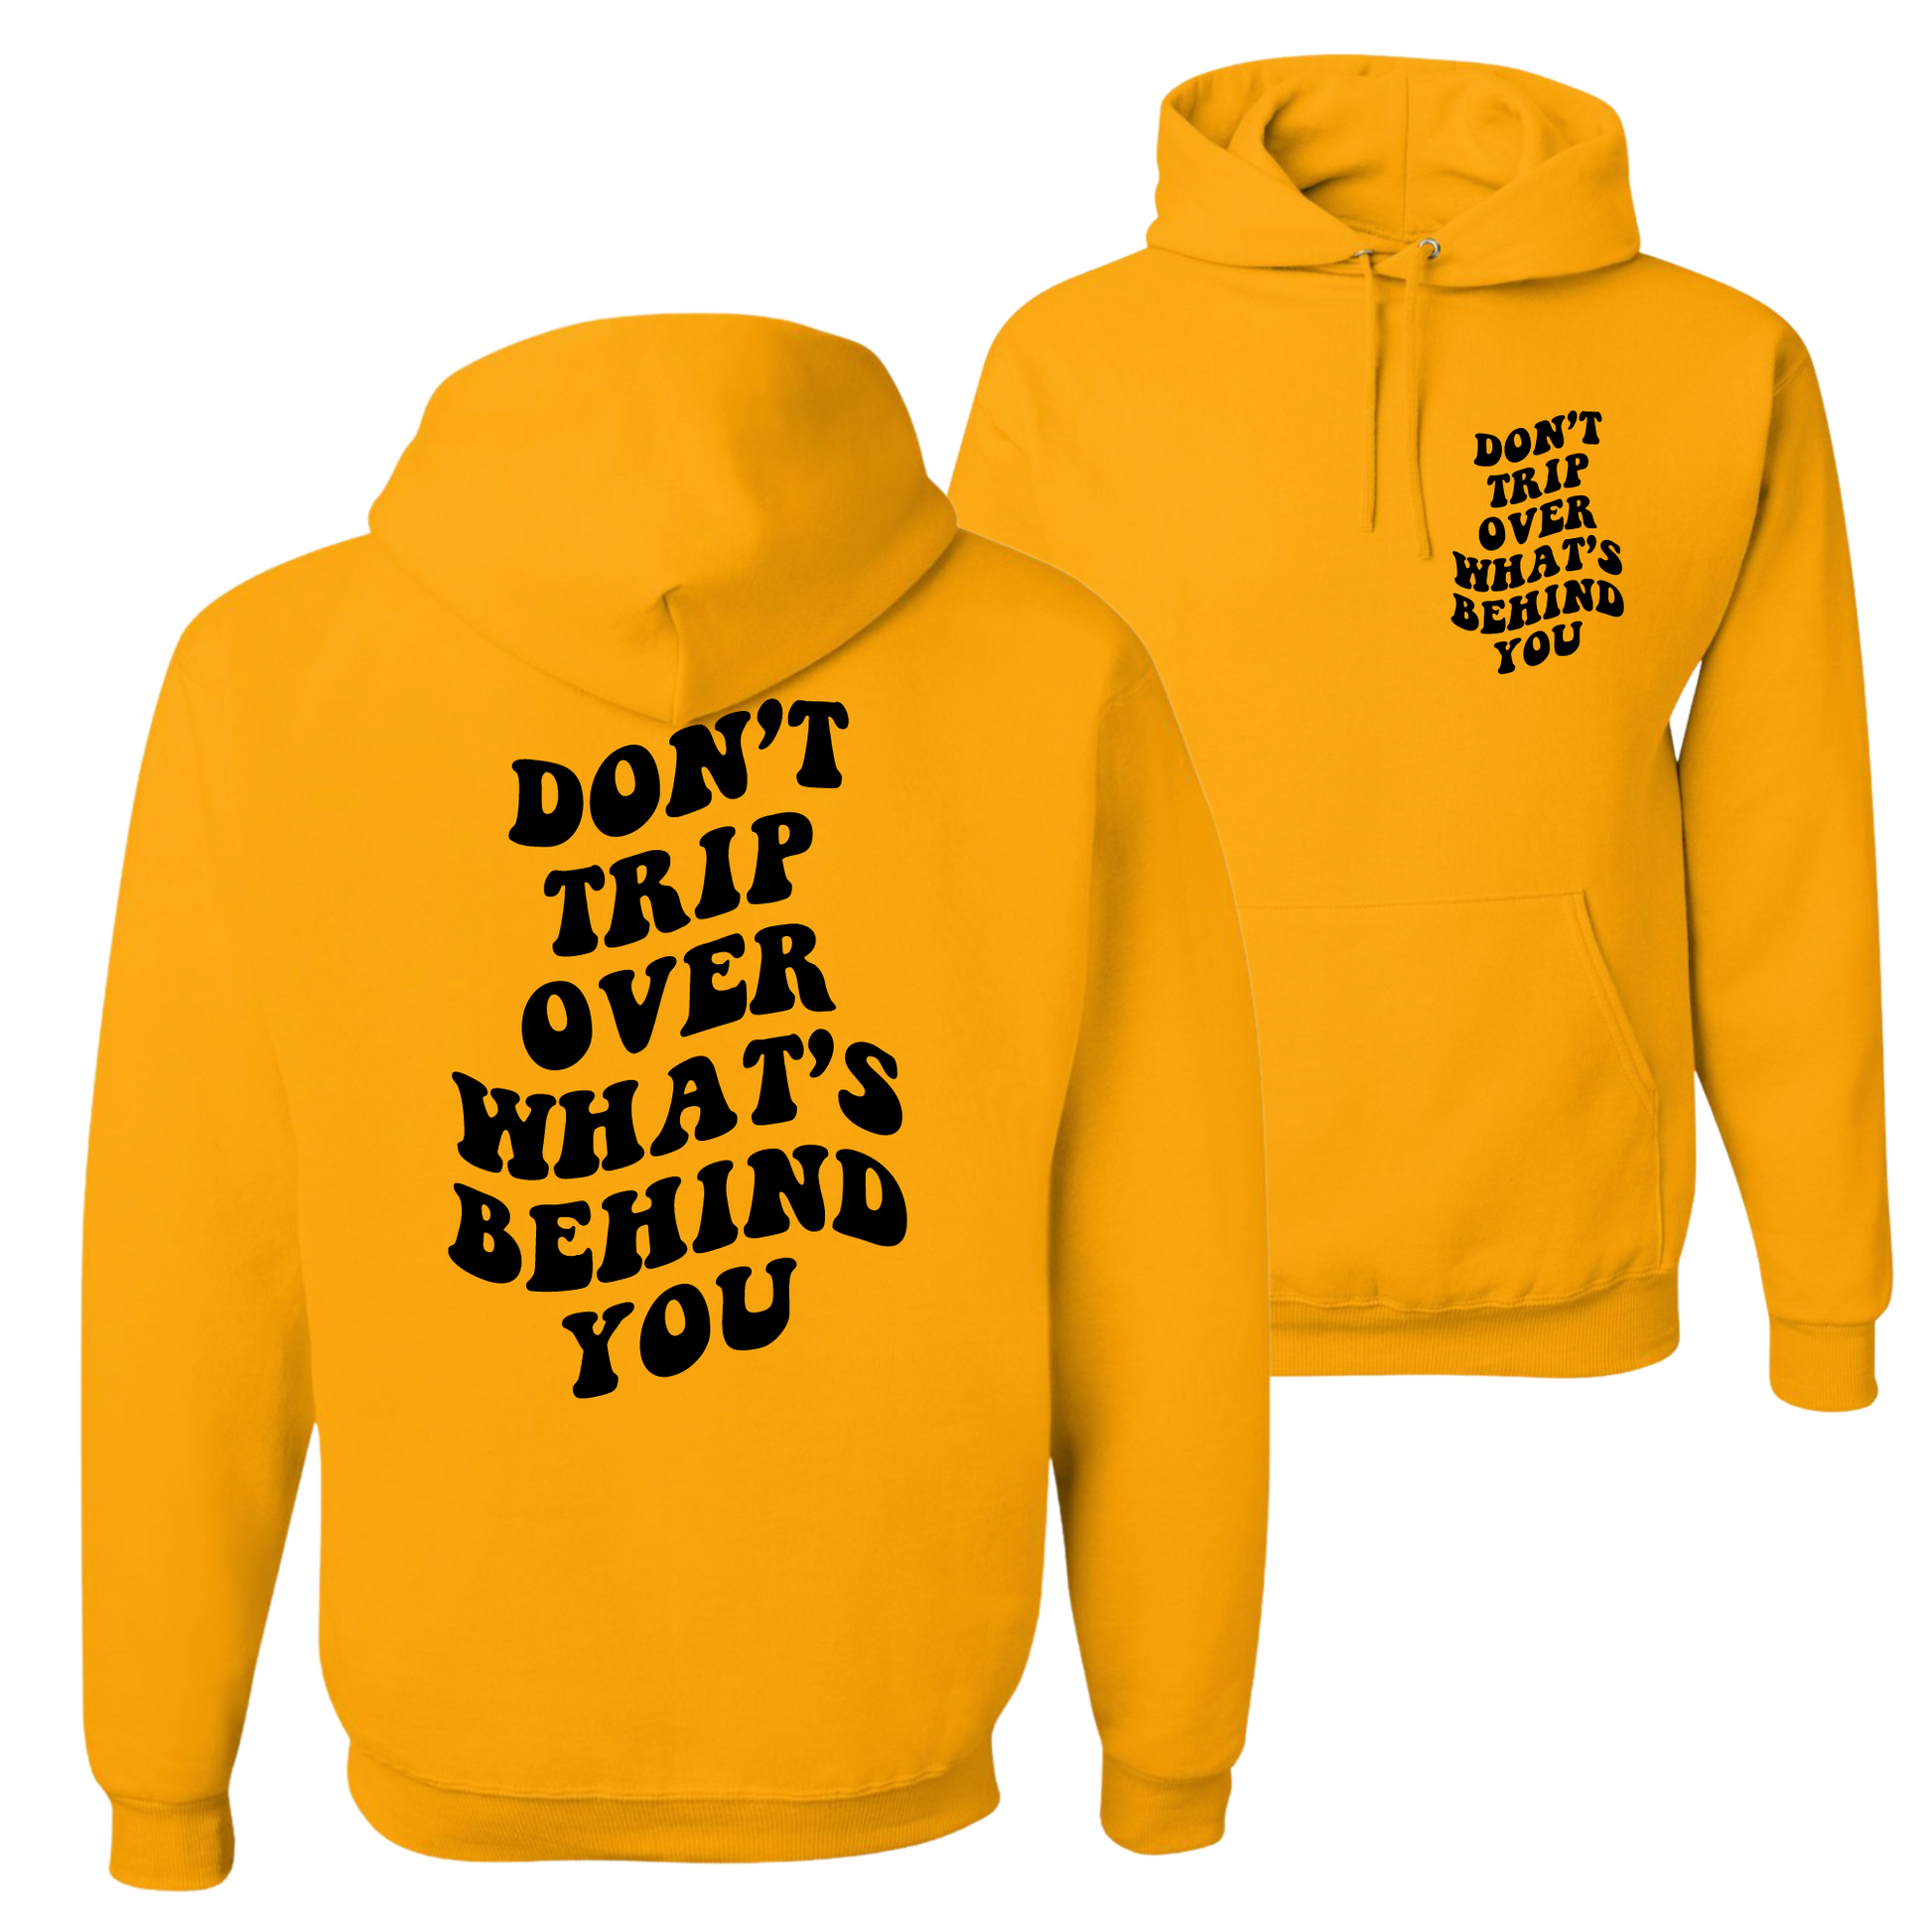 Resiliently Bold Don't Trip Over What's Behind You Golden Yellow Hooded Sweatshirt